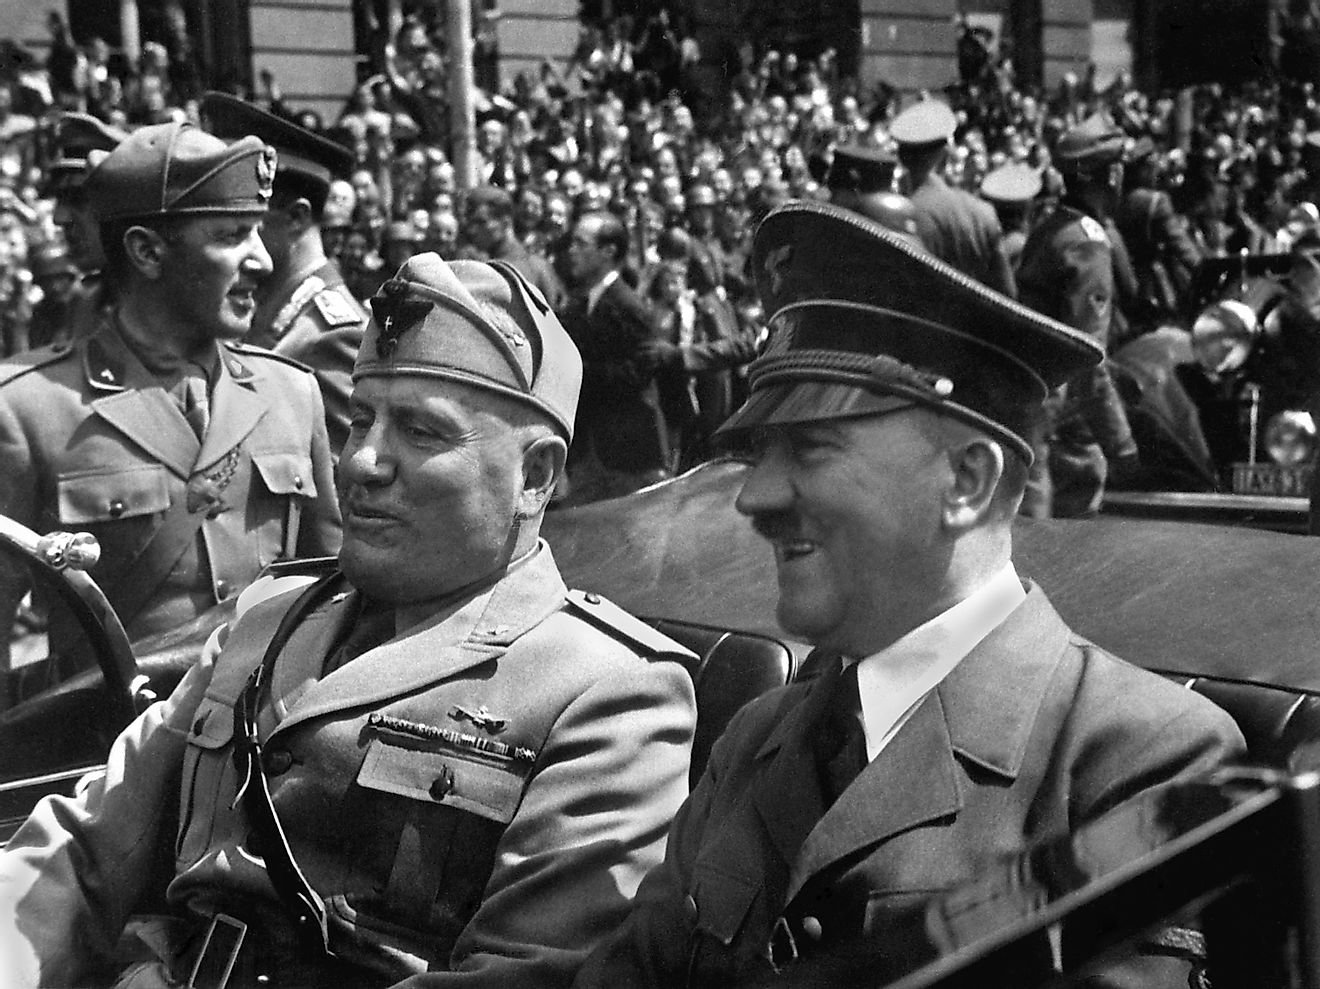 Who Were the Axis Powers in WWII?